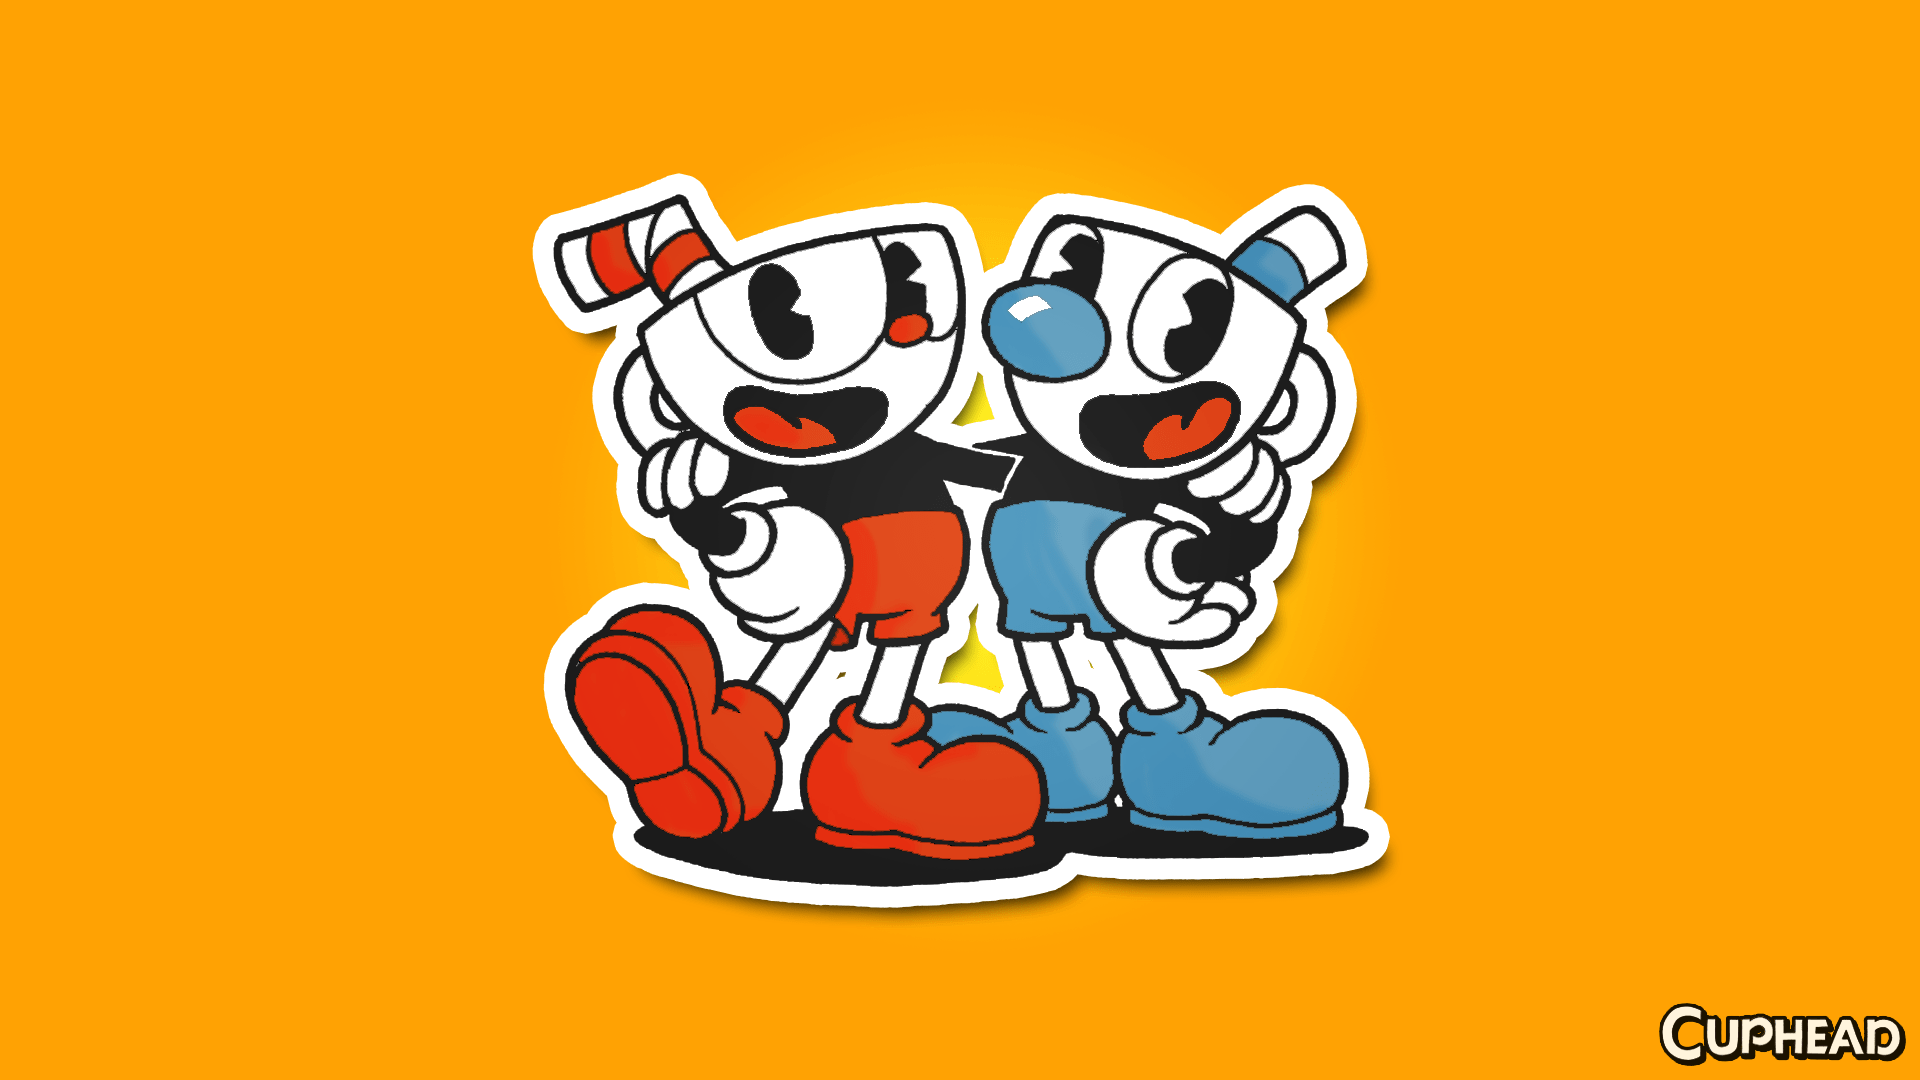 1337885 The Cuphead Show HD  Rare Gallery HD Wallpapers